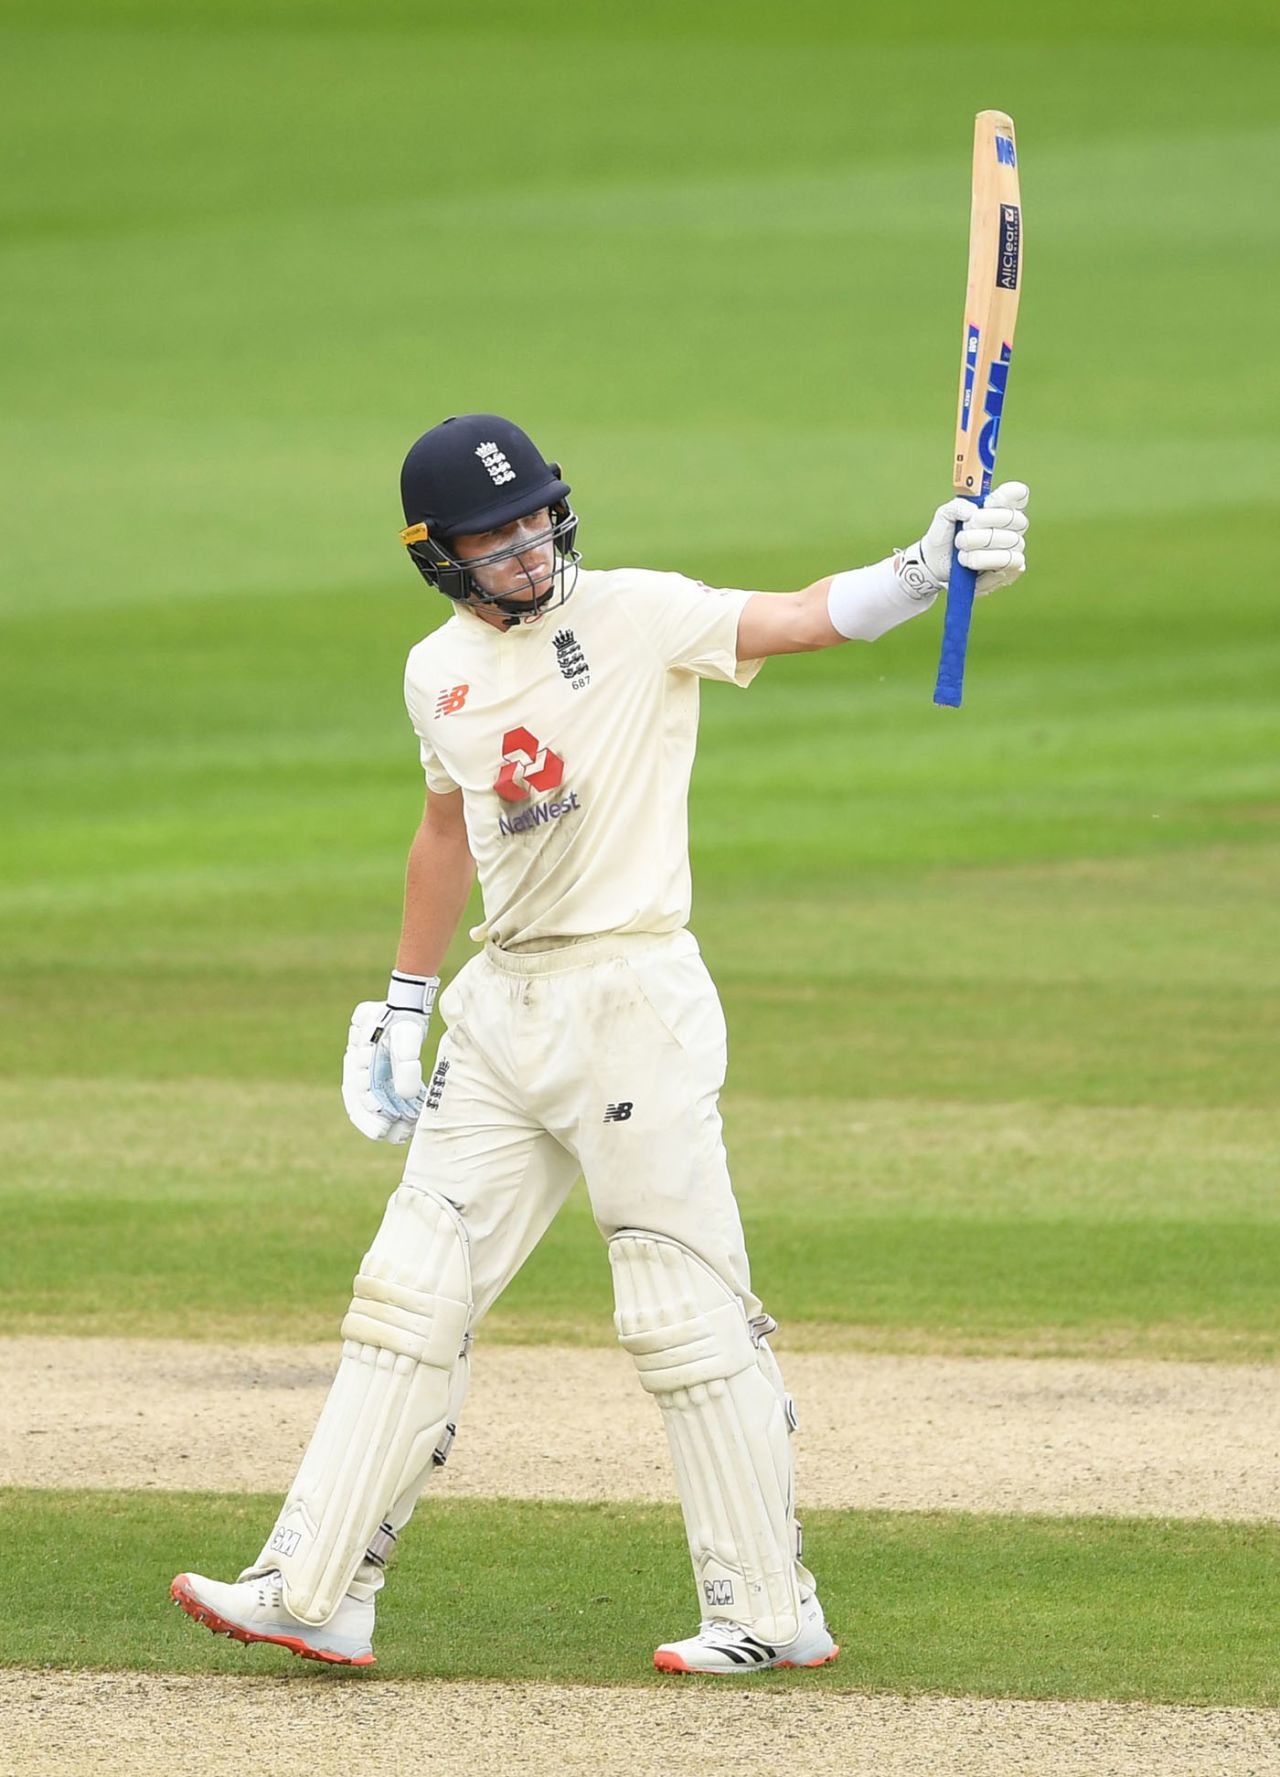 Ollie Pope acknowledges his half-century, England v West Indies, 3rd Test, Emirates Old Trafford, 1st day, July 24, 2020